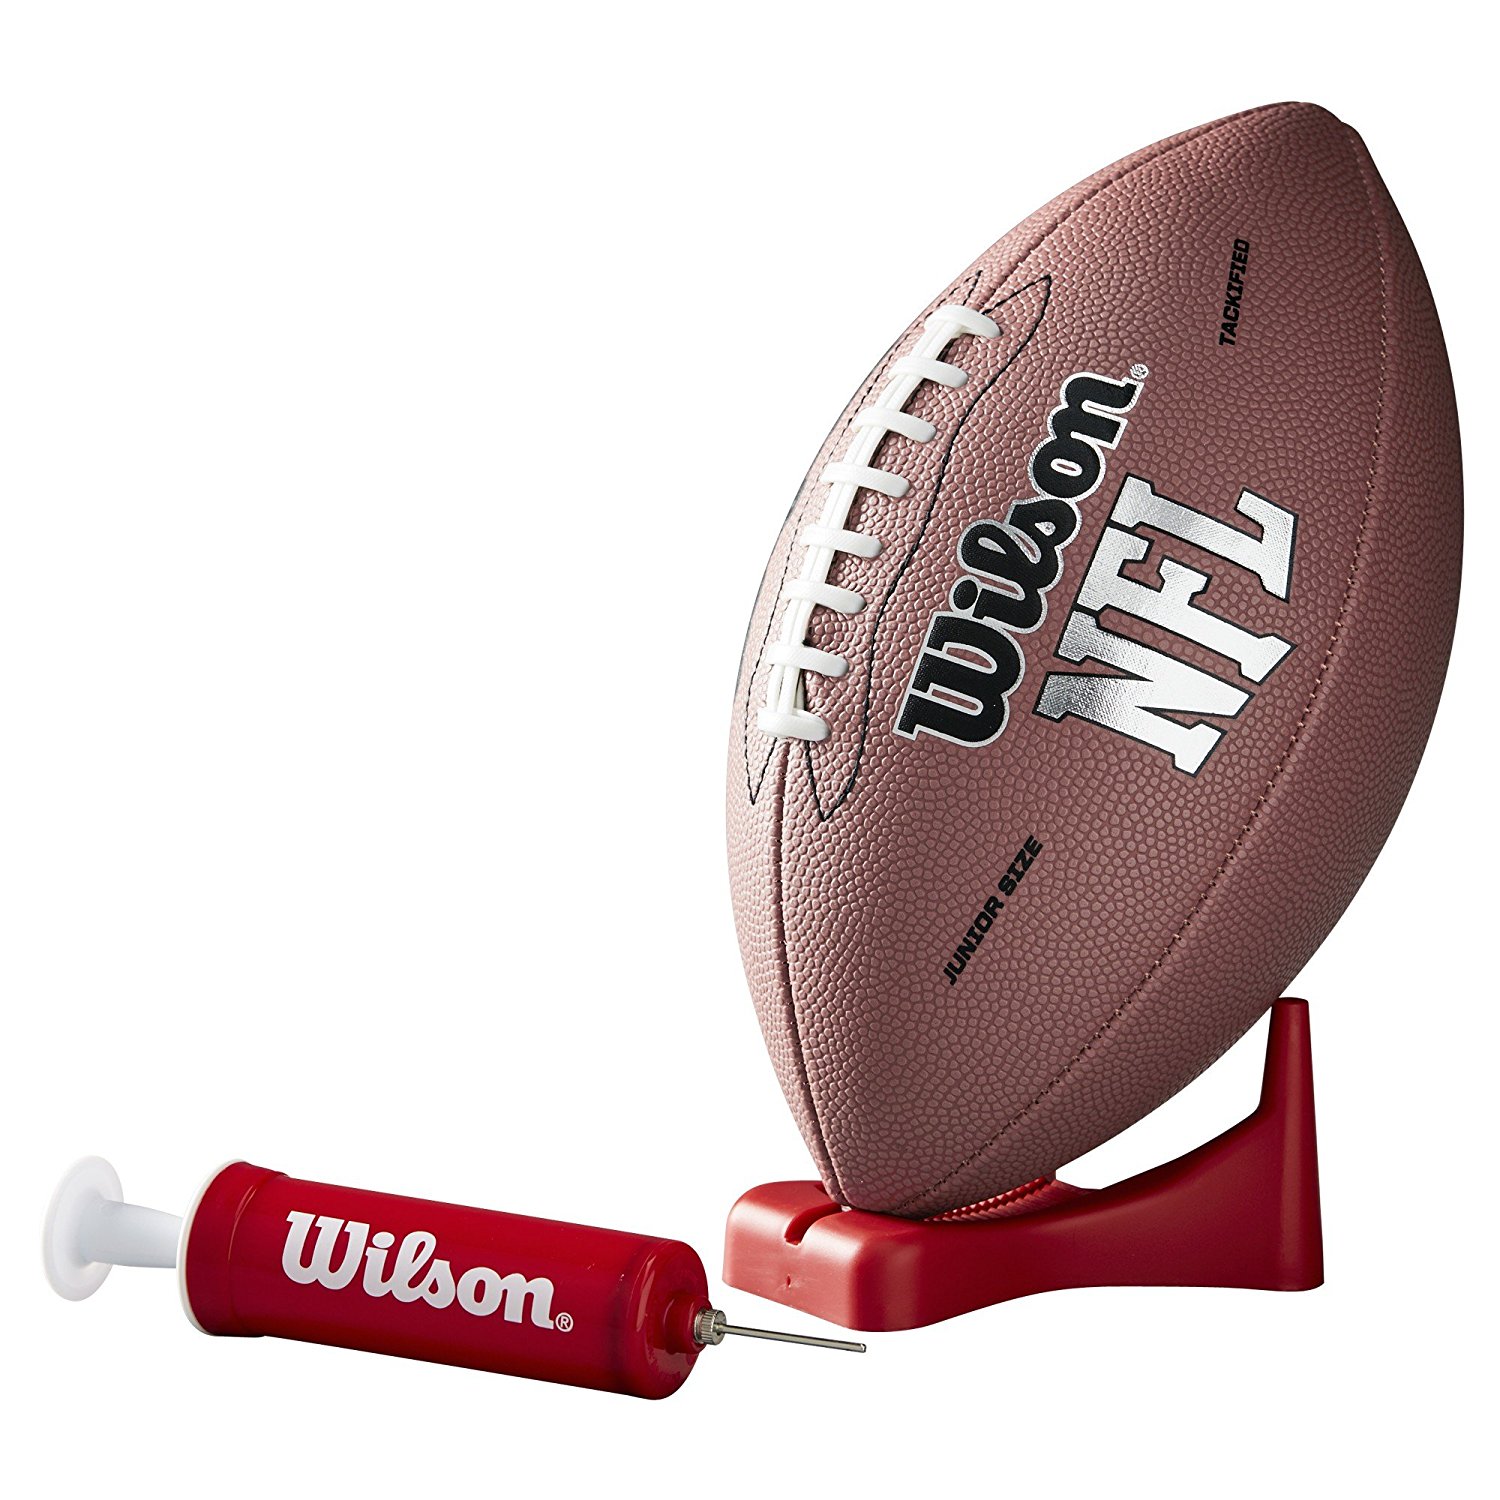 Wilson NFL MVP Junior Football with Pump Only $8.99!